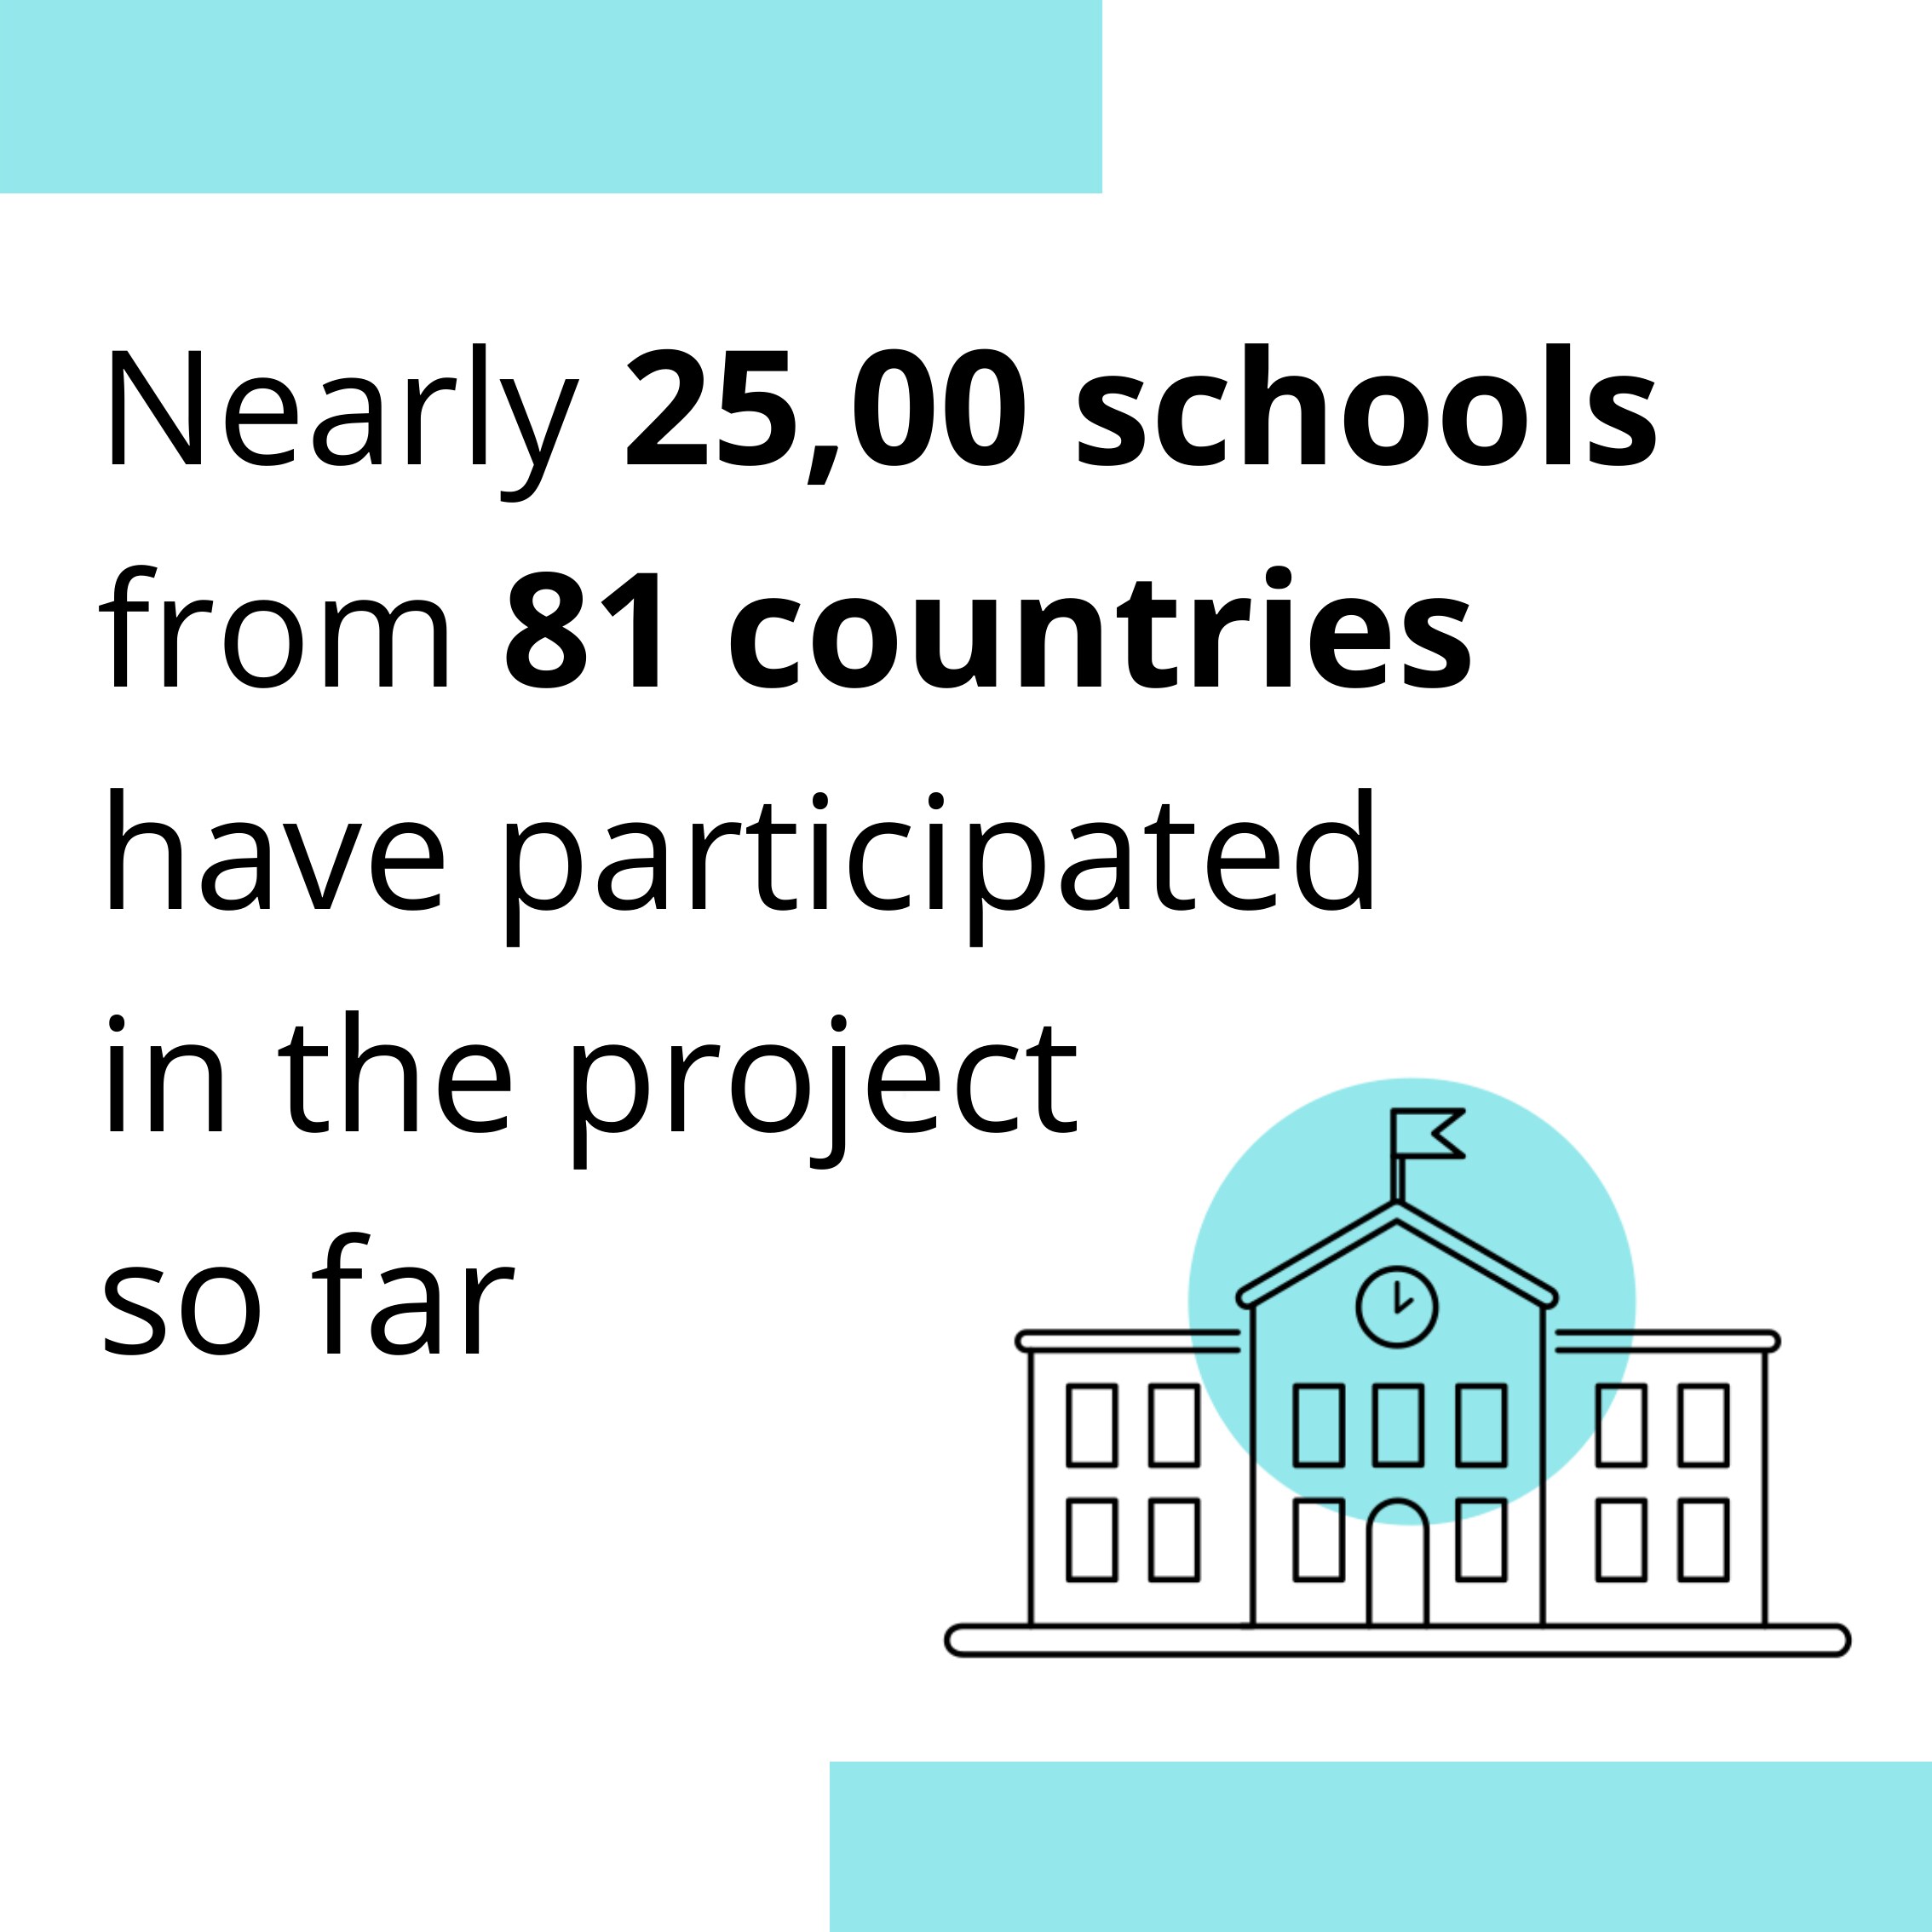 Stat - Nearly 2,500 schools from 81 countries have participated in the project so far